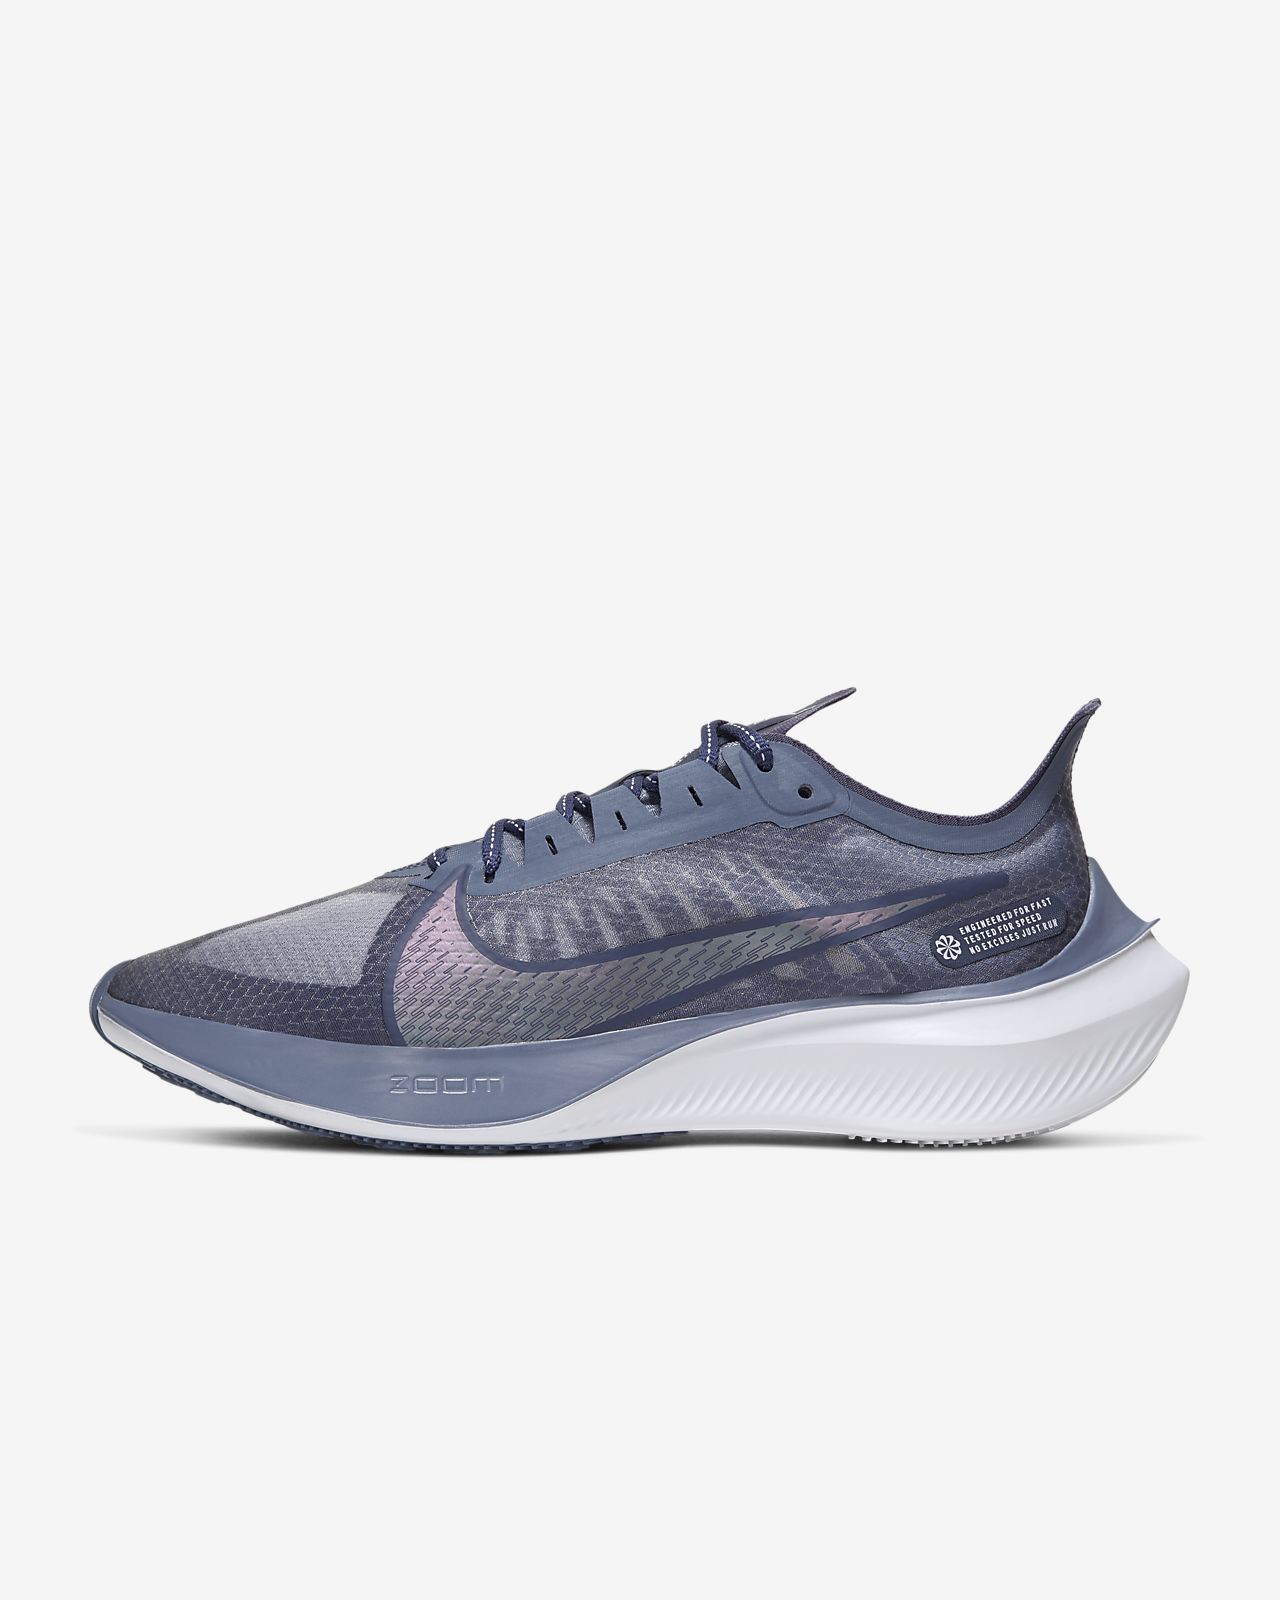 is nike zoom gravity good for running